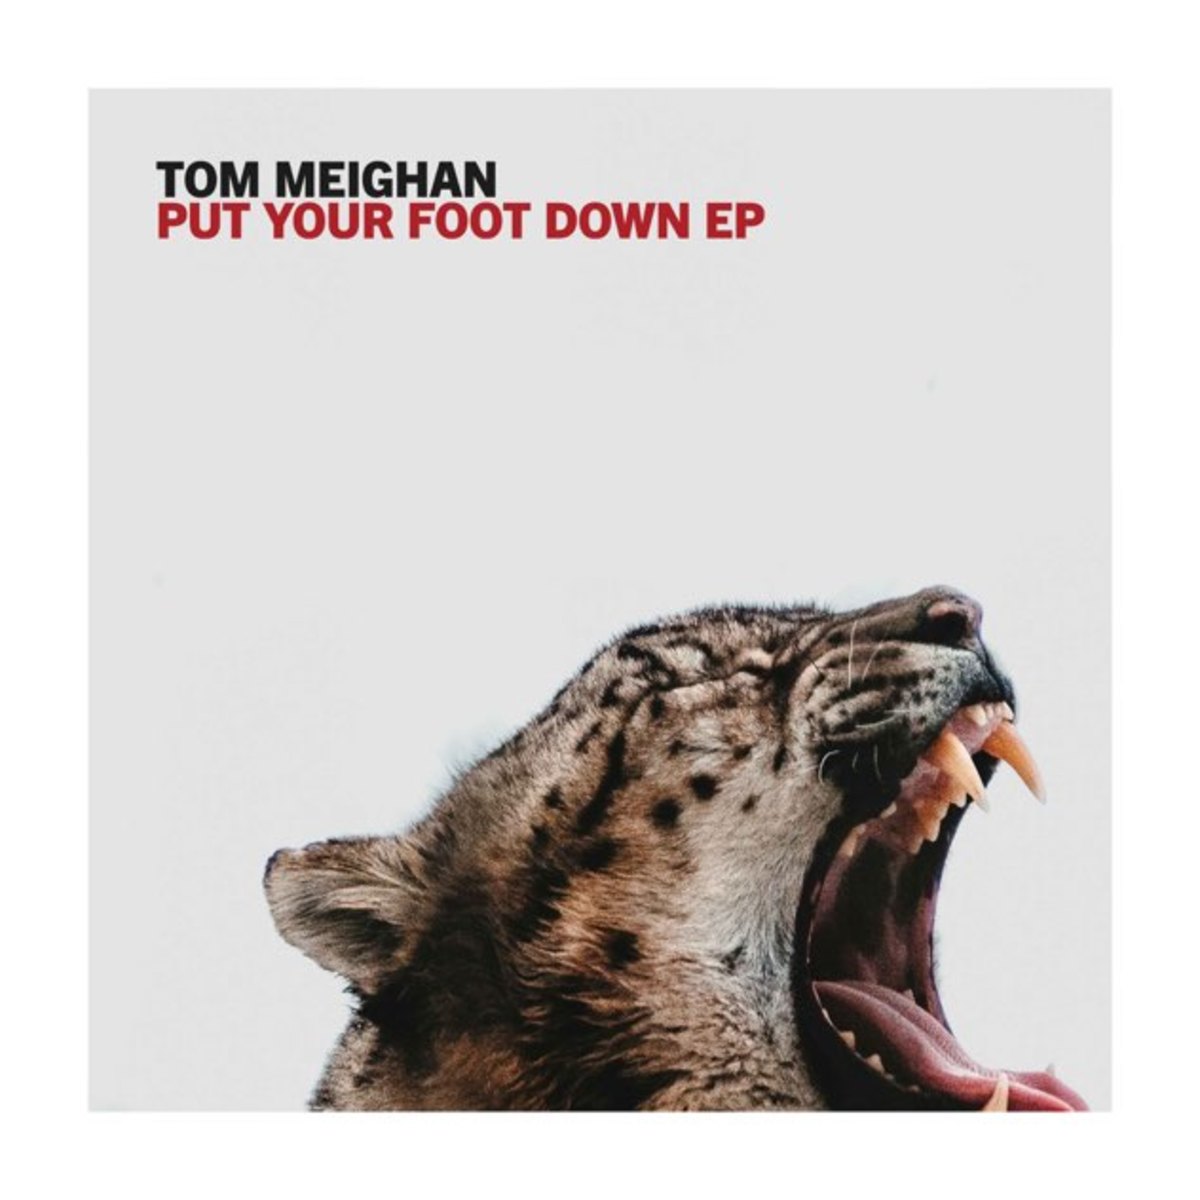 Put Your Foot Down EP